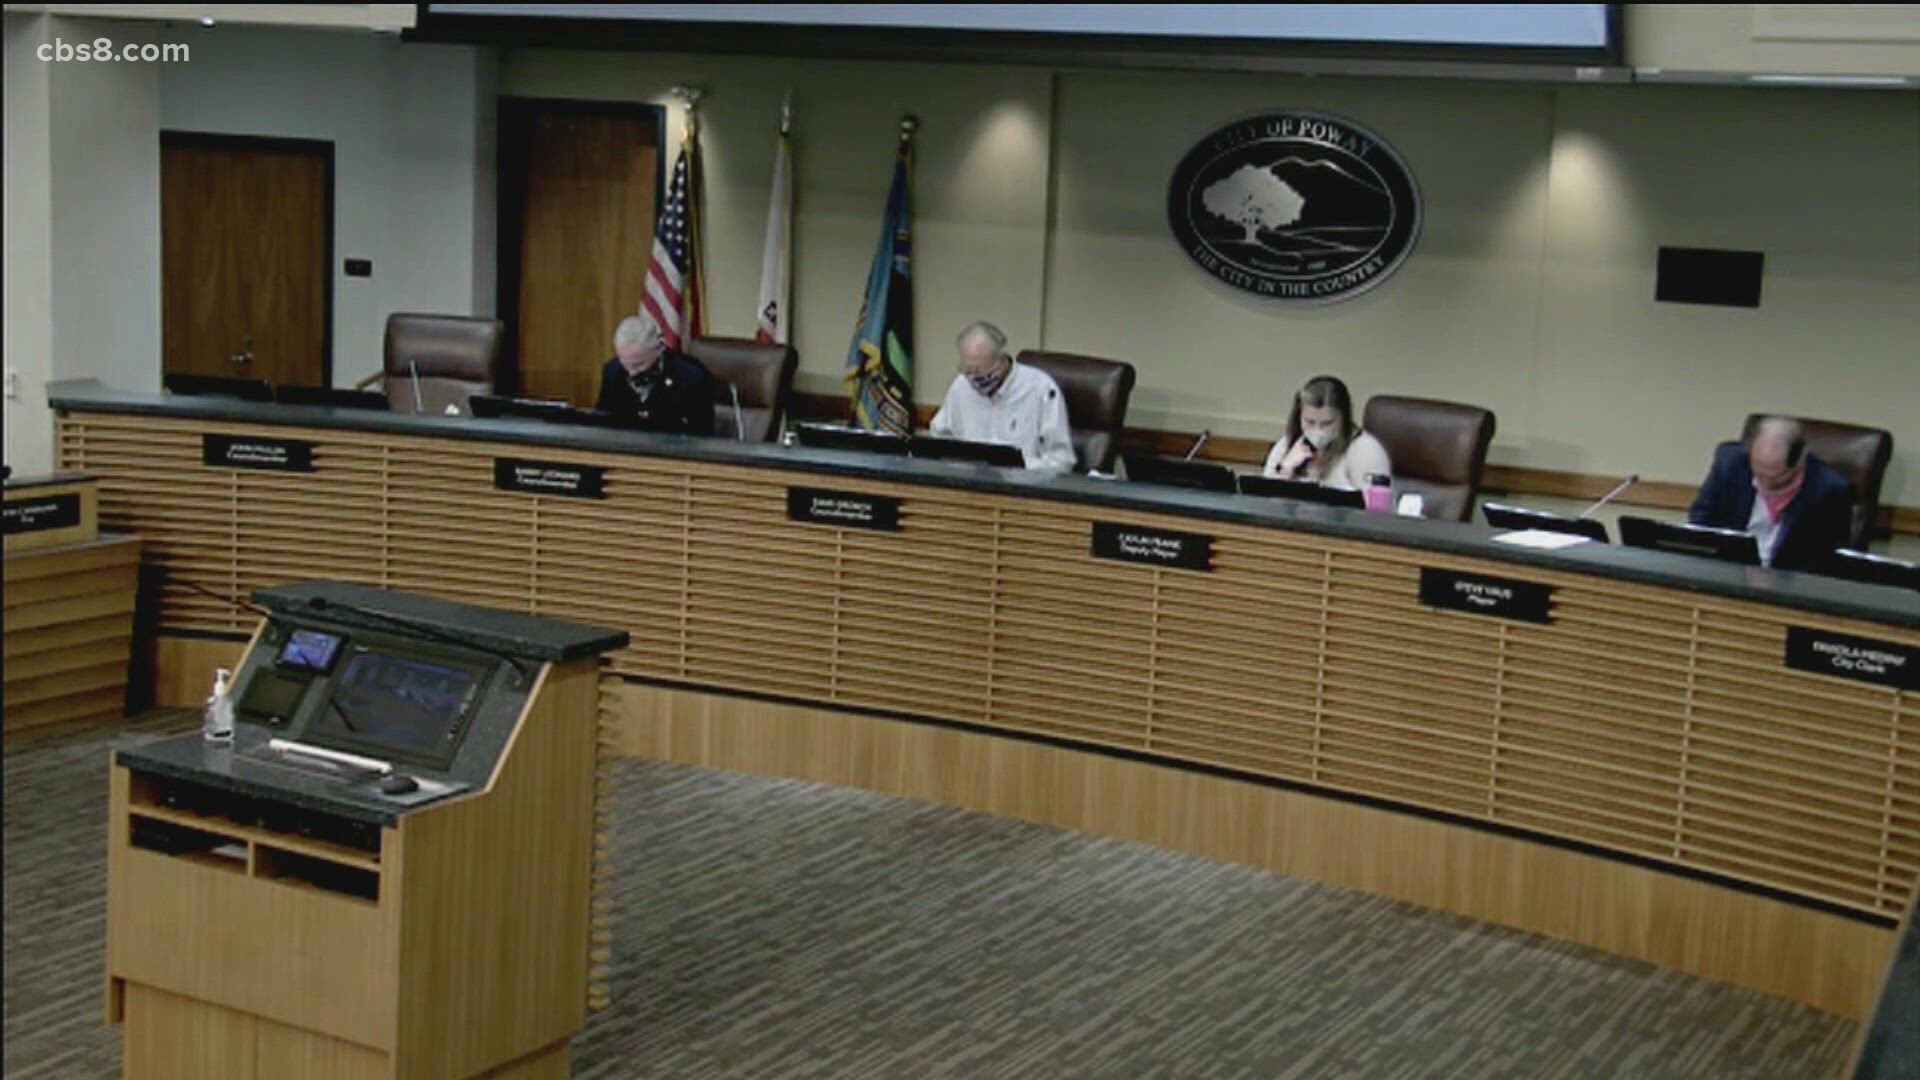 The City Council voted to approve the extension of outdoor dining and the picnic table loan program.